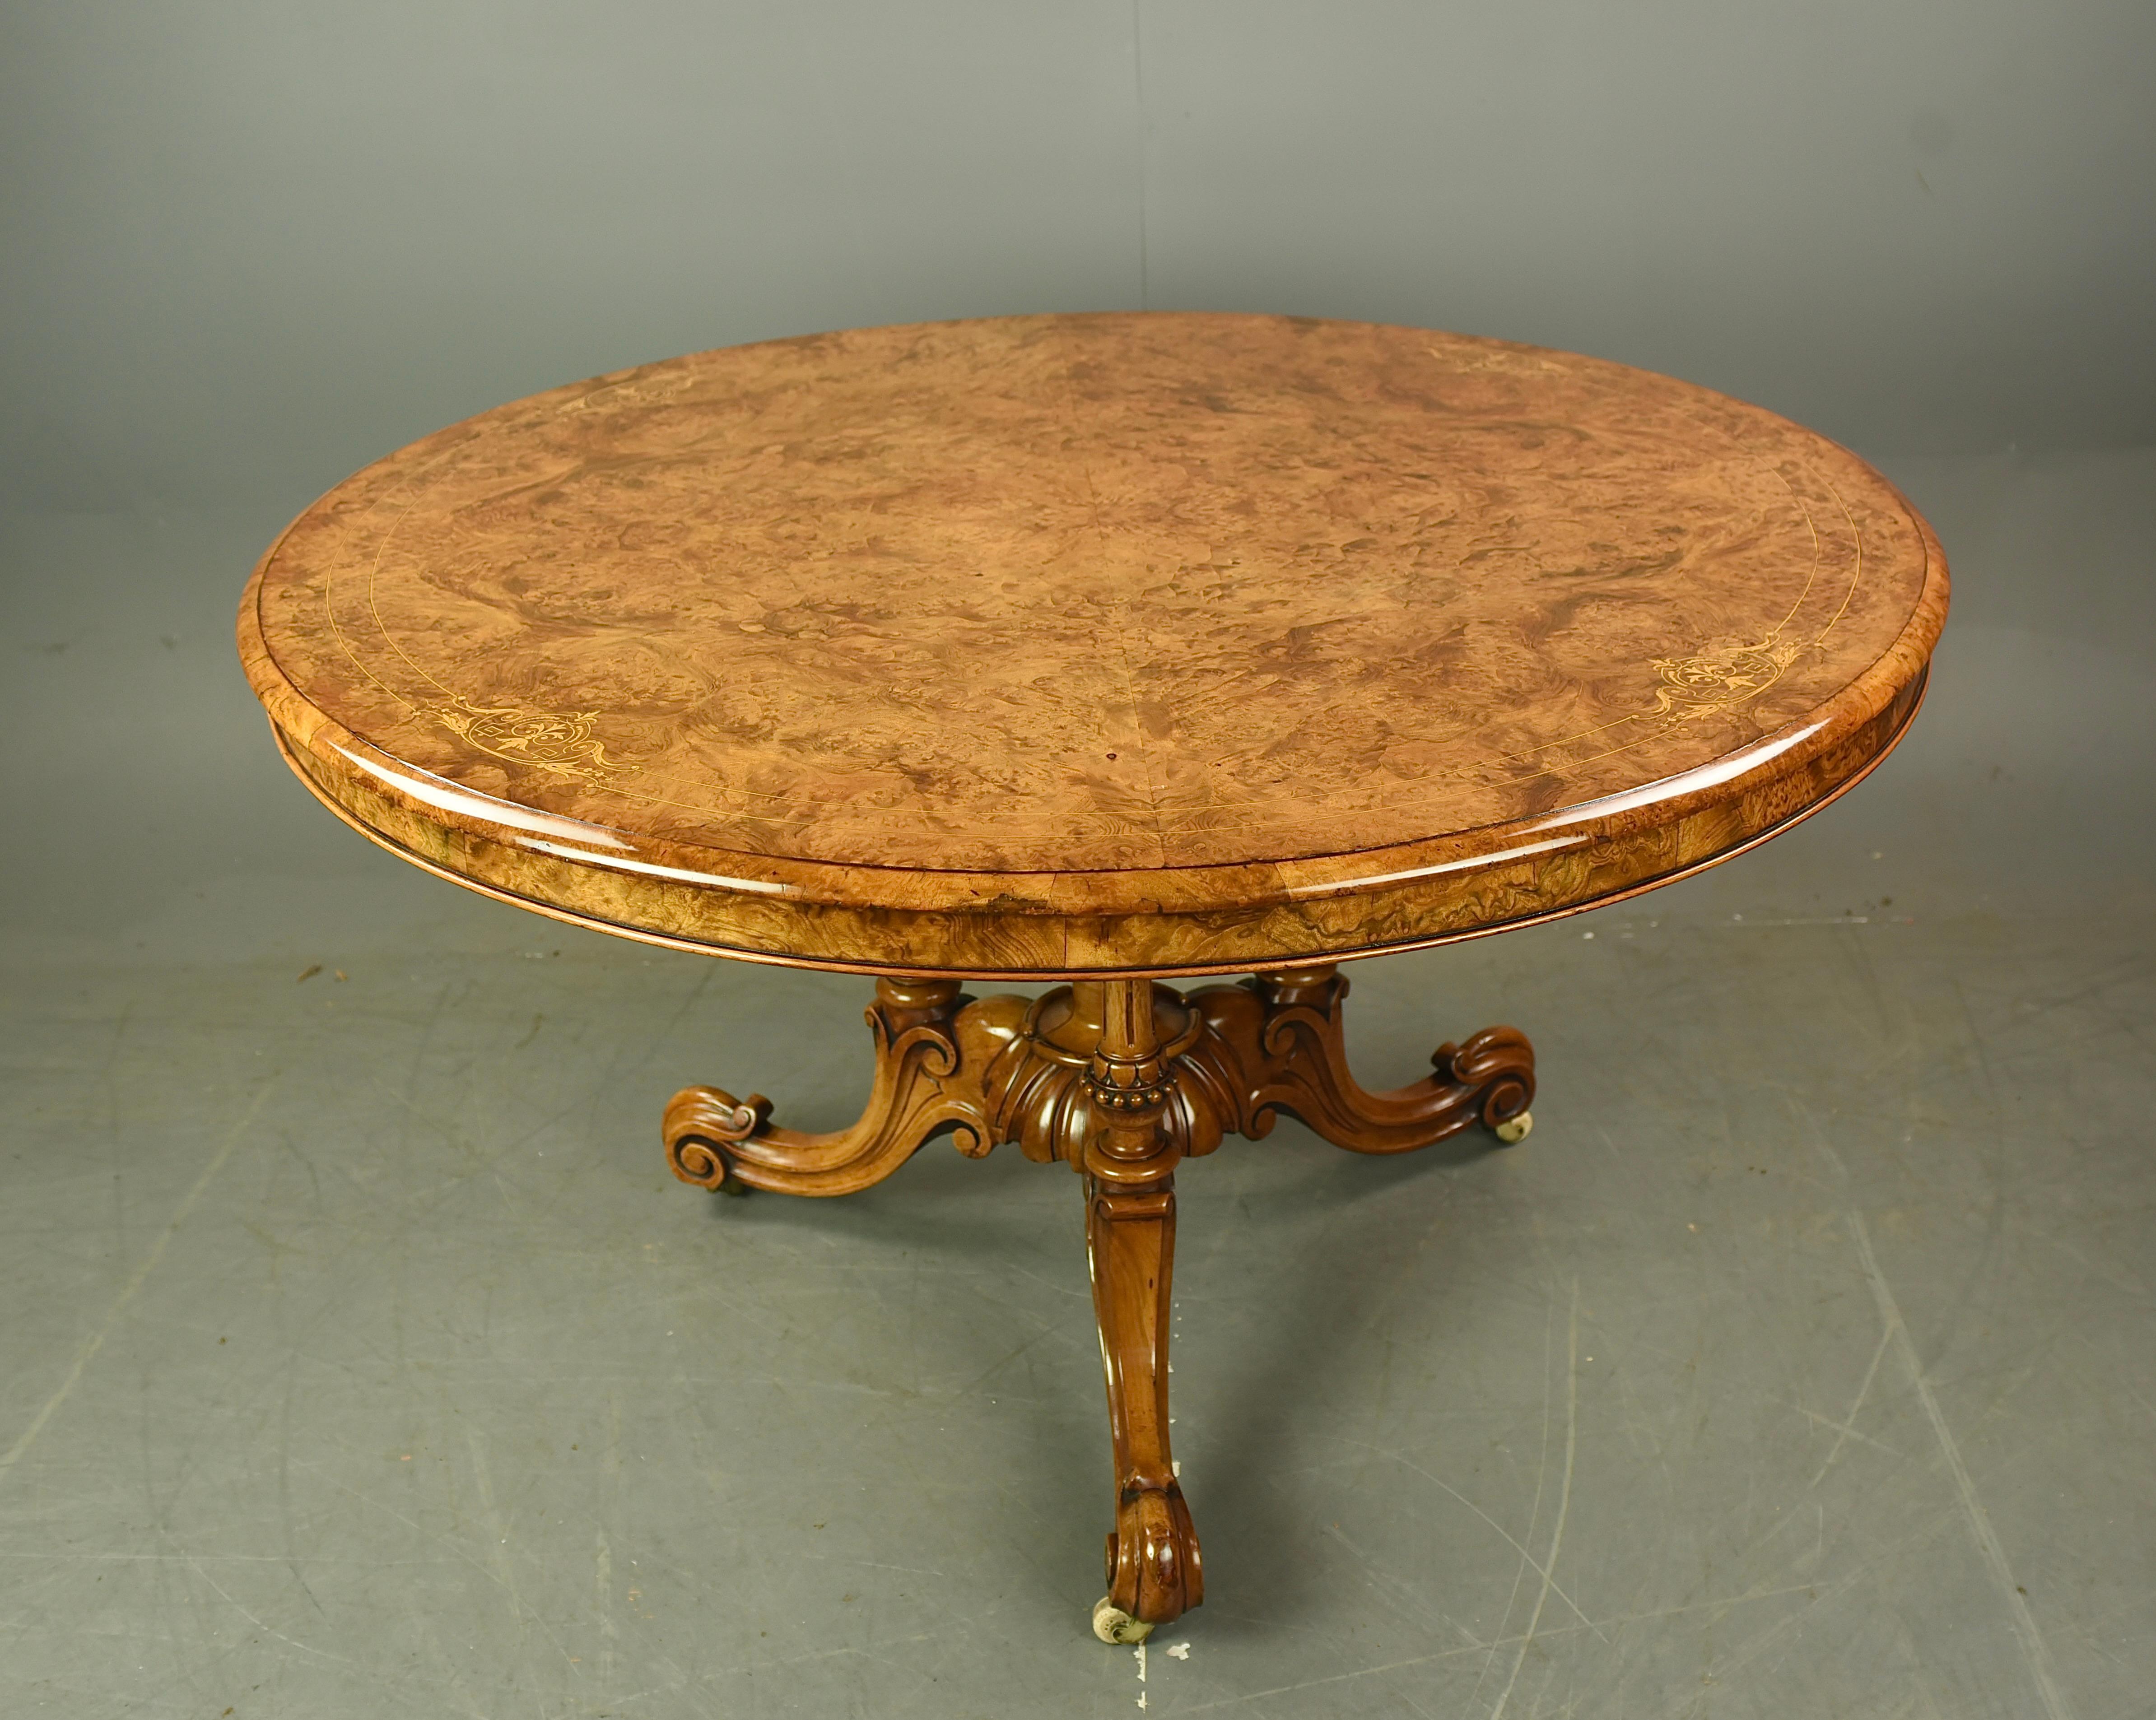 Fine quality burr walnut circular breakfast /centre  table with fine inlay attributed to Gillow .
The top is quarter veneered on mahogany that has a fantastic grain and colour with fine inlay detailing that is a tilt top action with a brass  catch